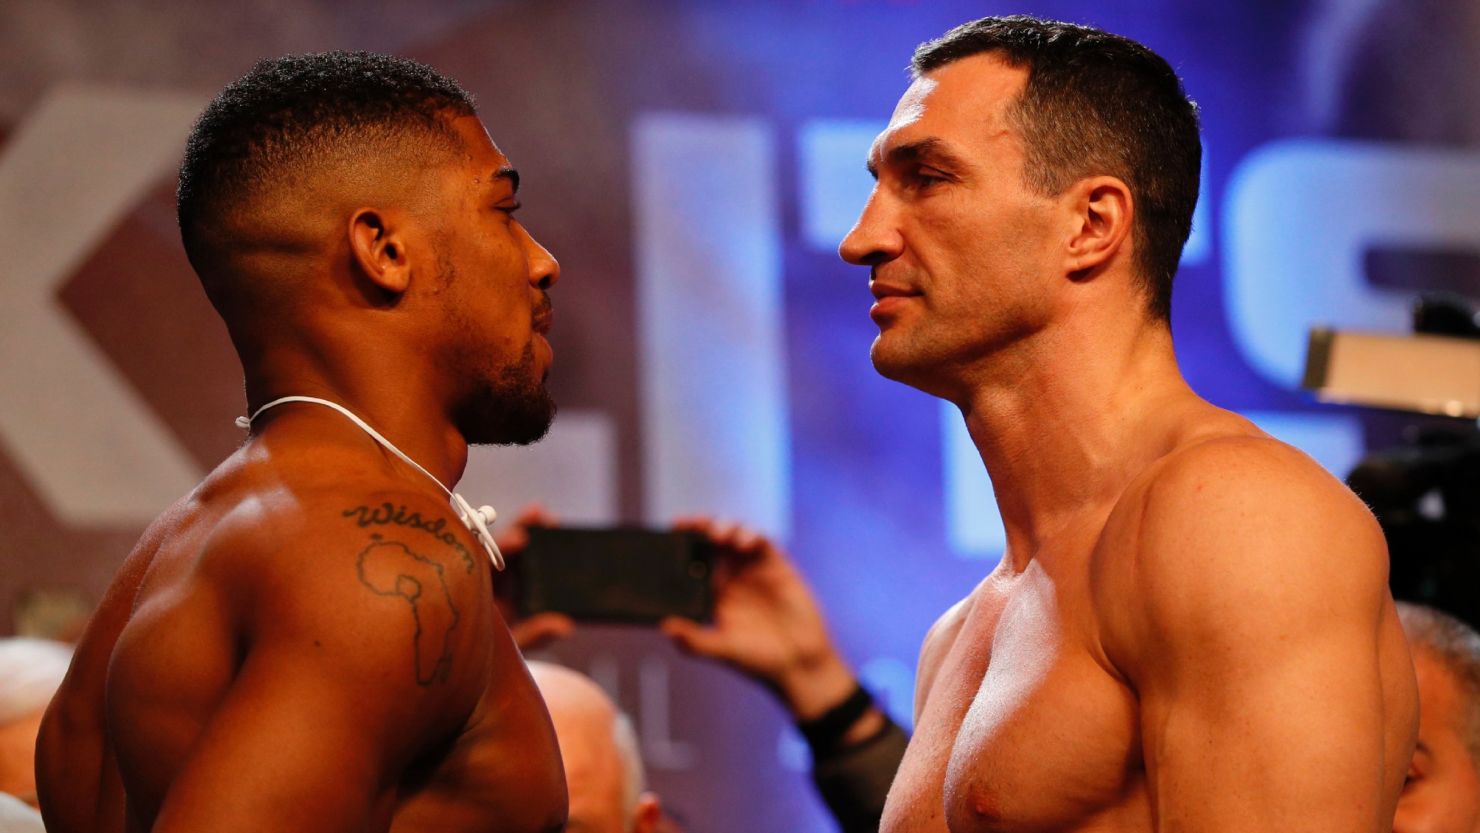 Anthony Joshua and Wladimir Klitschko square up during Friday's weigh-in.